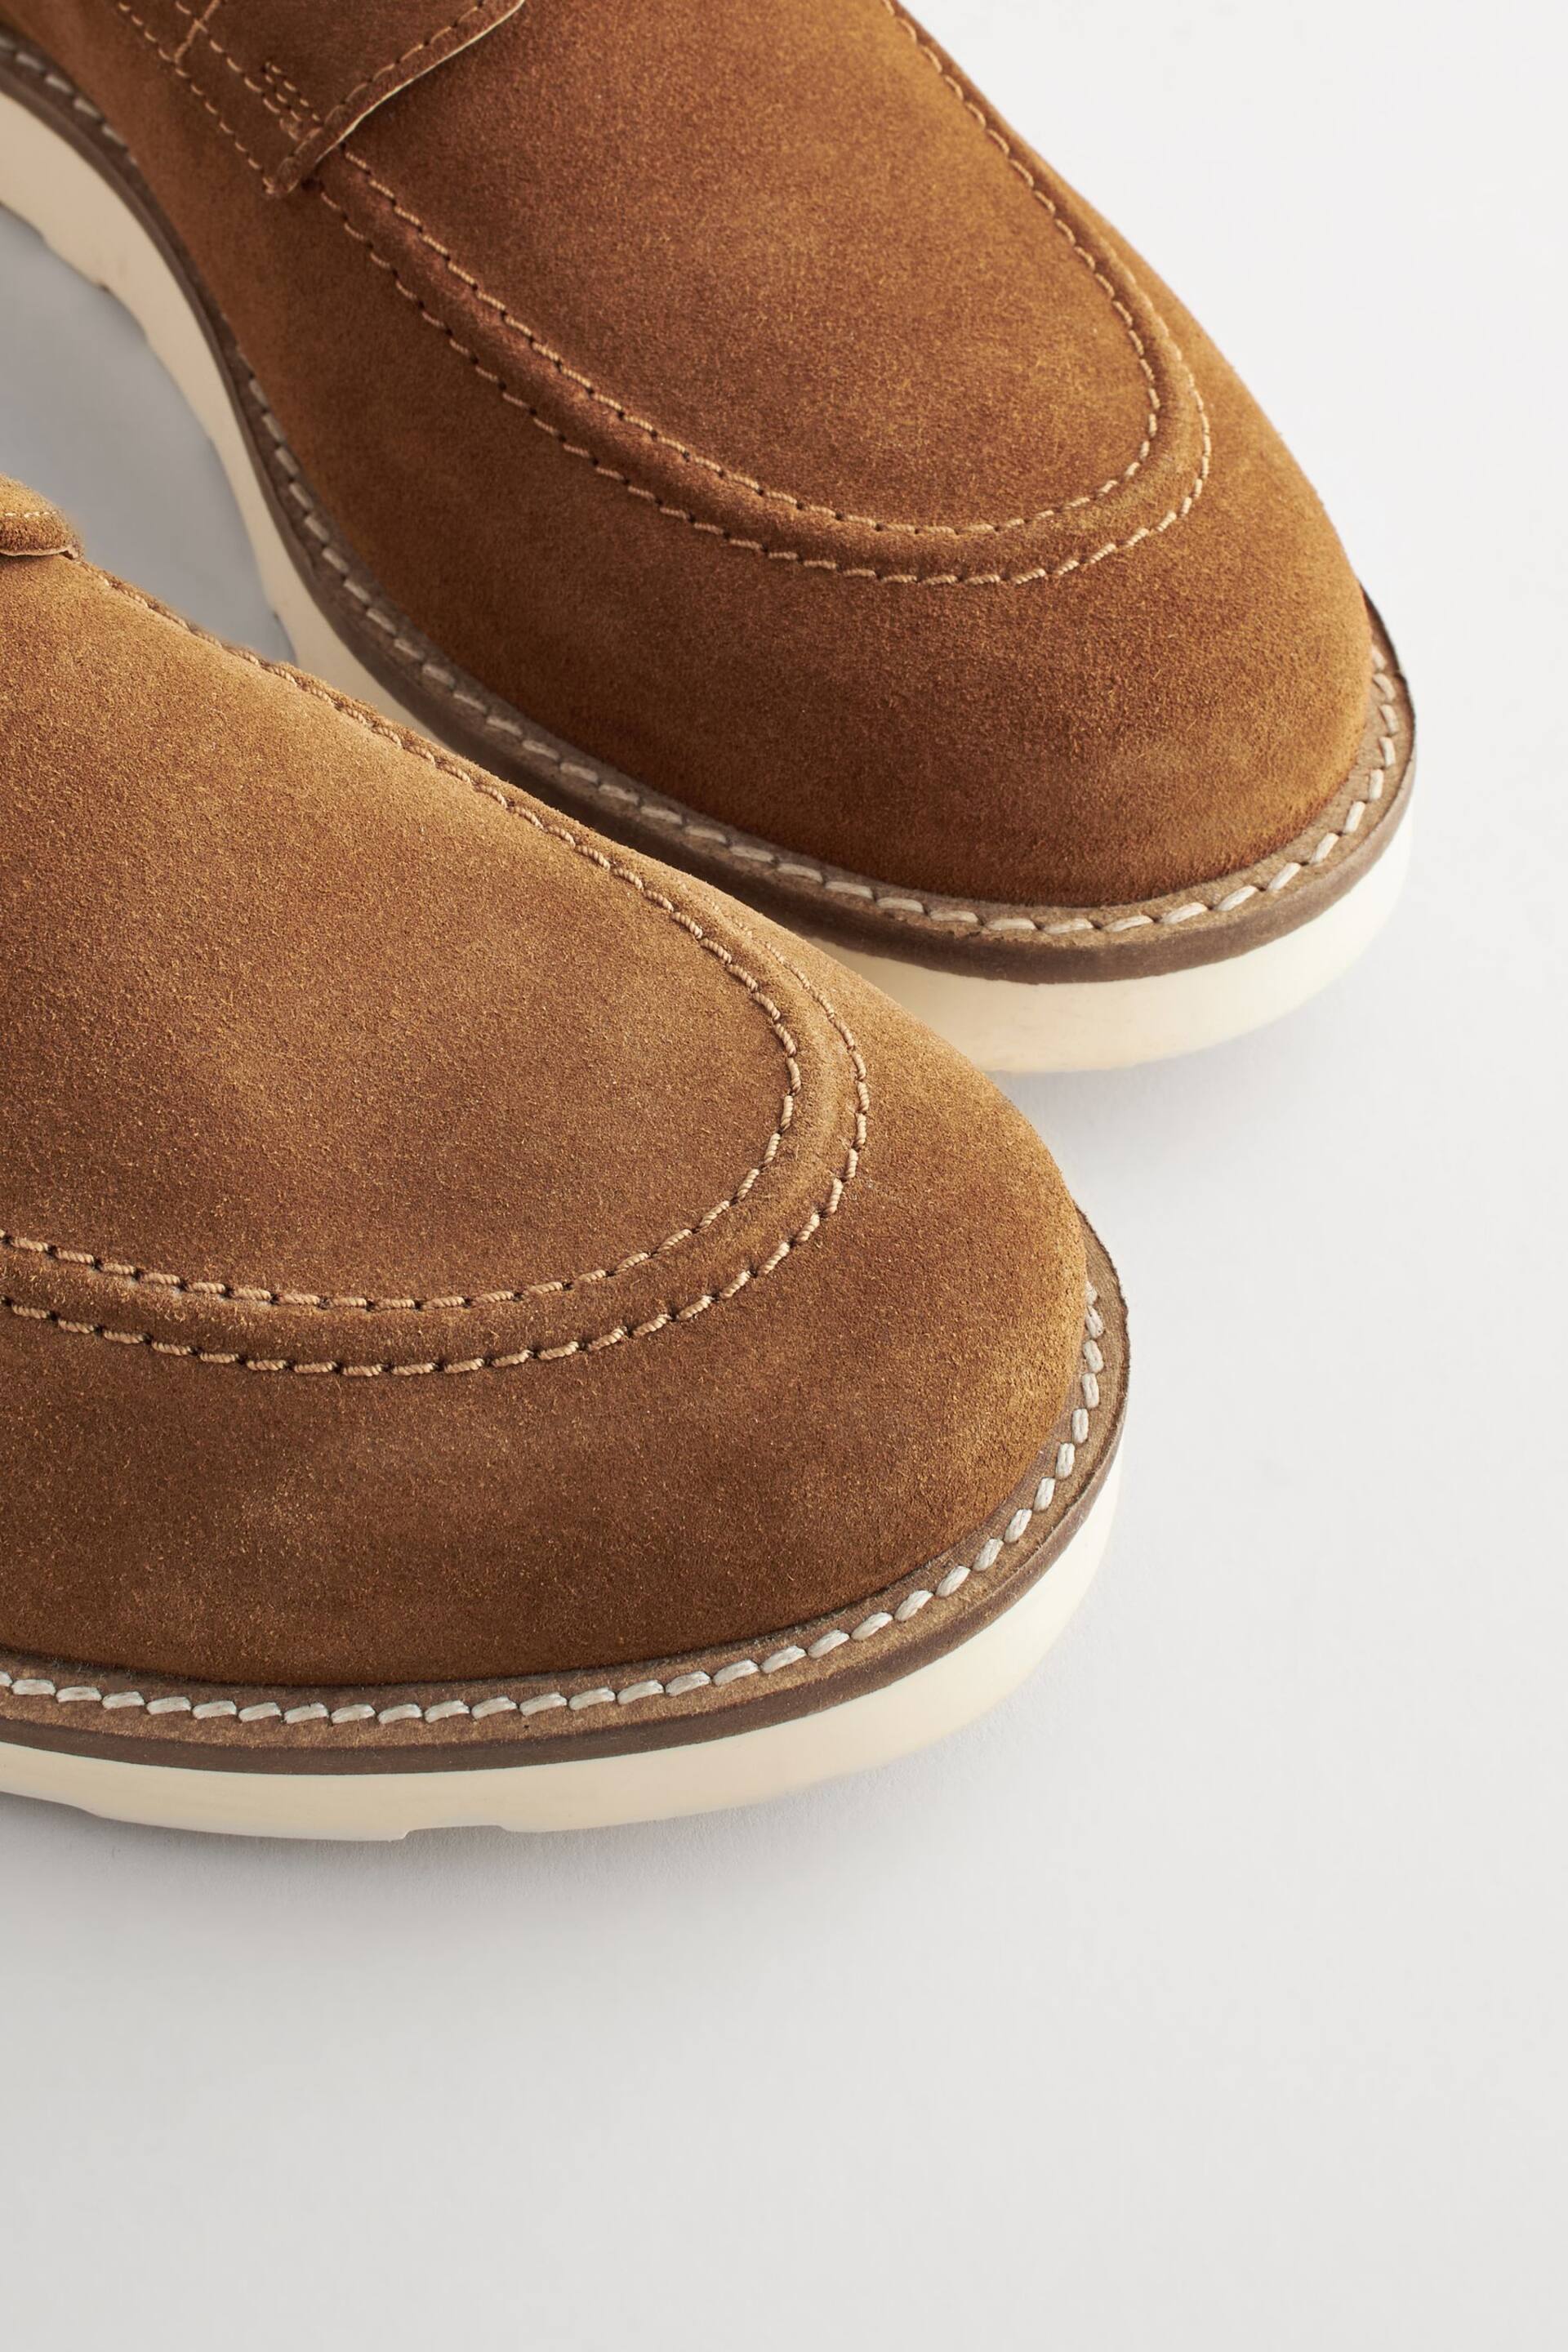 Tan Brown Suede Apron Wedge Shoes - Image 5 of 7